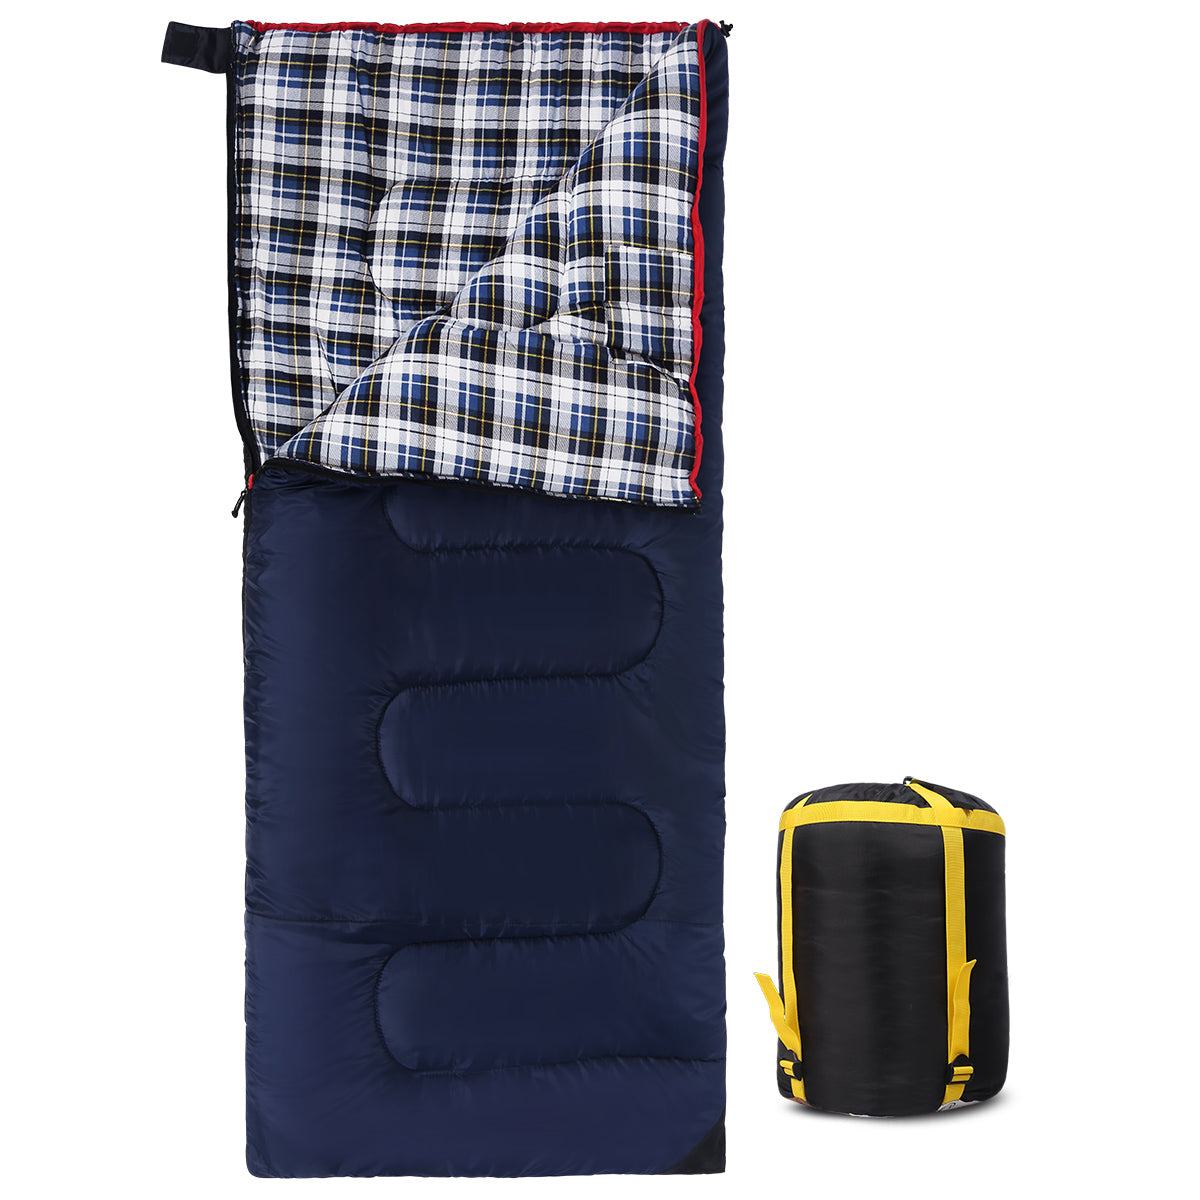 Camping Sleeping Bag for Adult with Cotton Flannel Liner,Red Blue